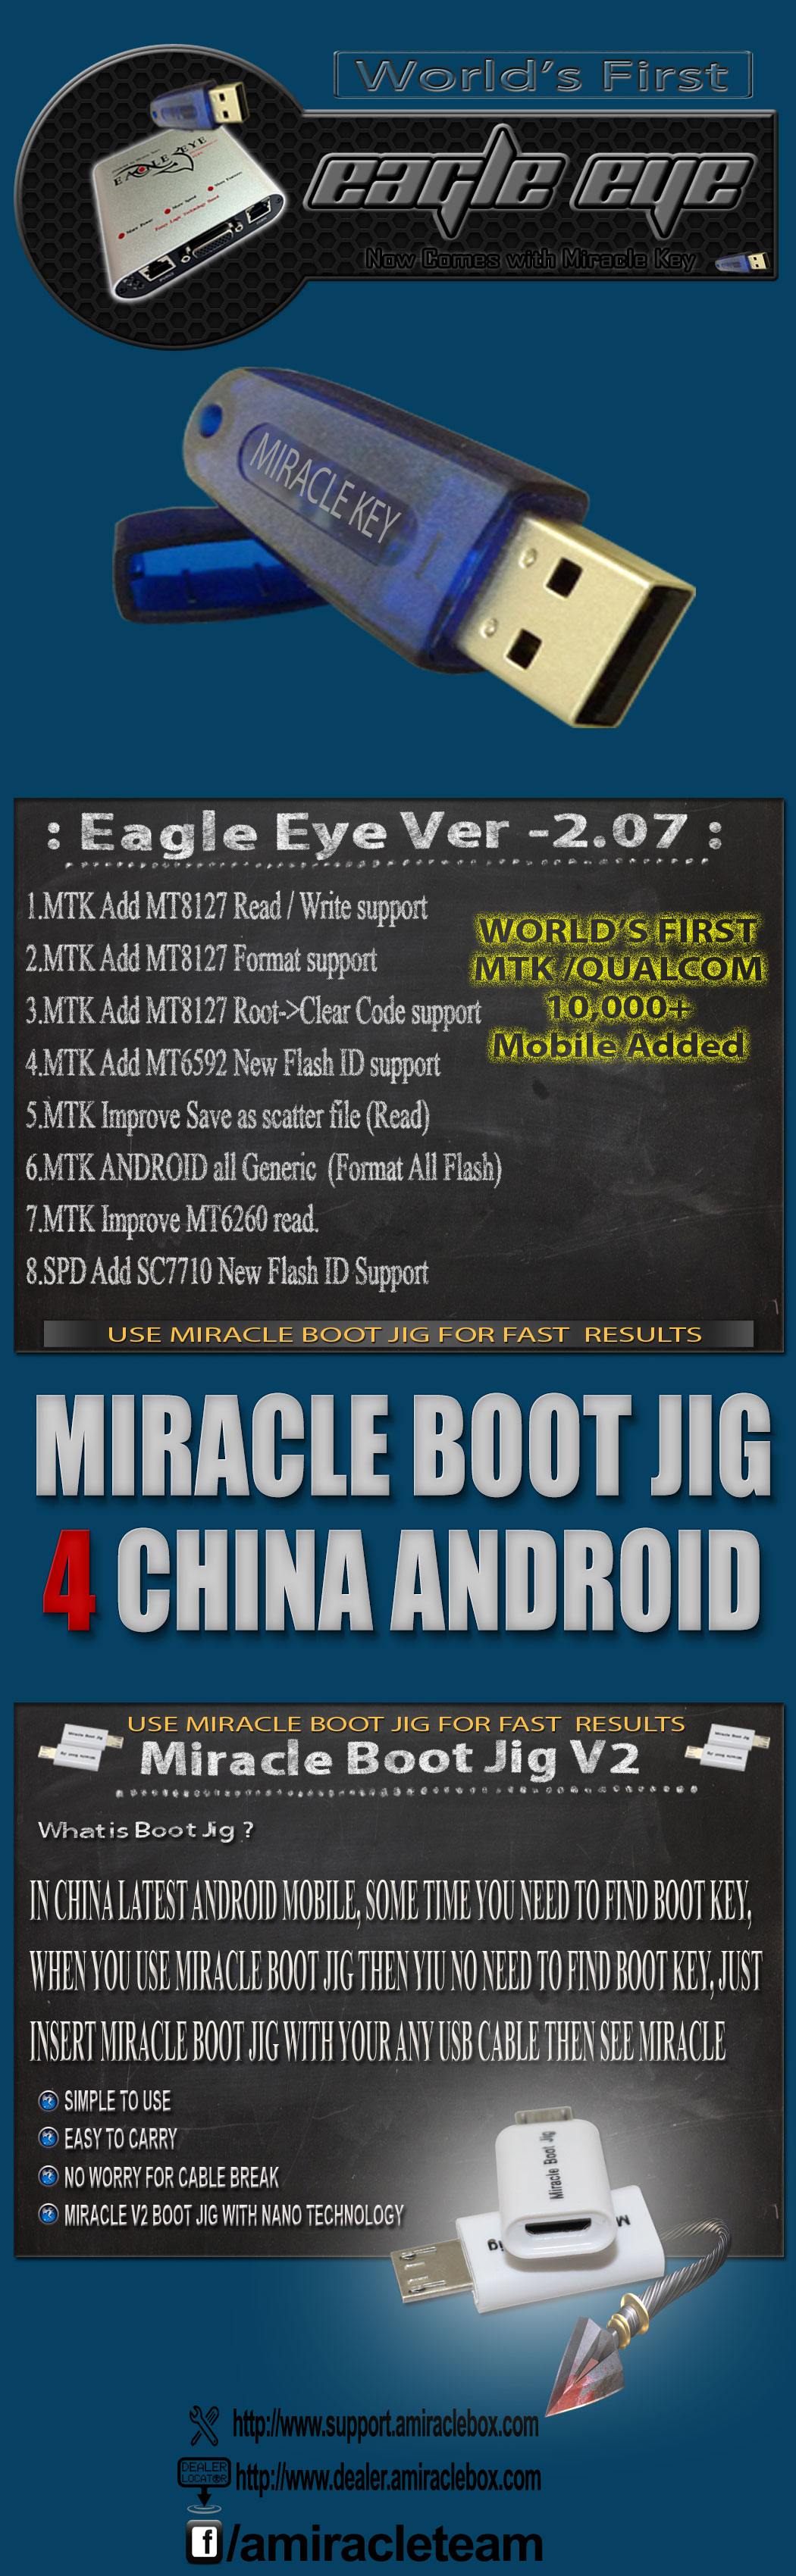 Miracle Eagle Eye Box 2.07(8th May)MTK & QUALCOM 7000+ Mobile Add Miracle Key Edition Miracle-eagle-2.7